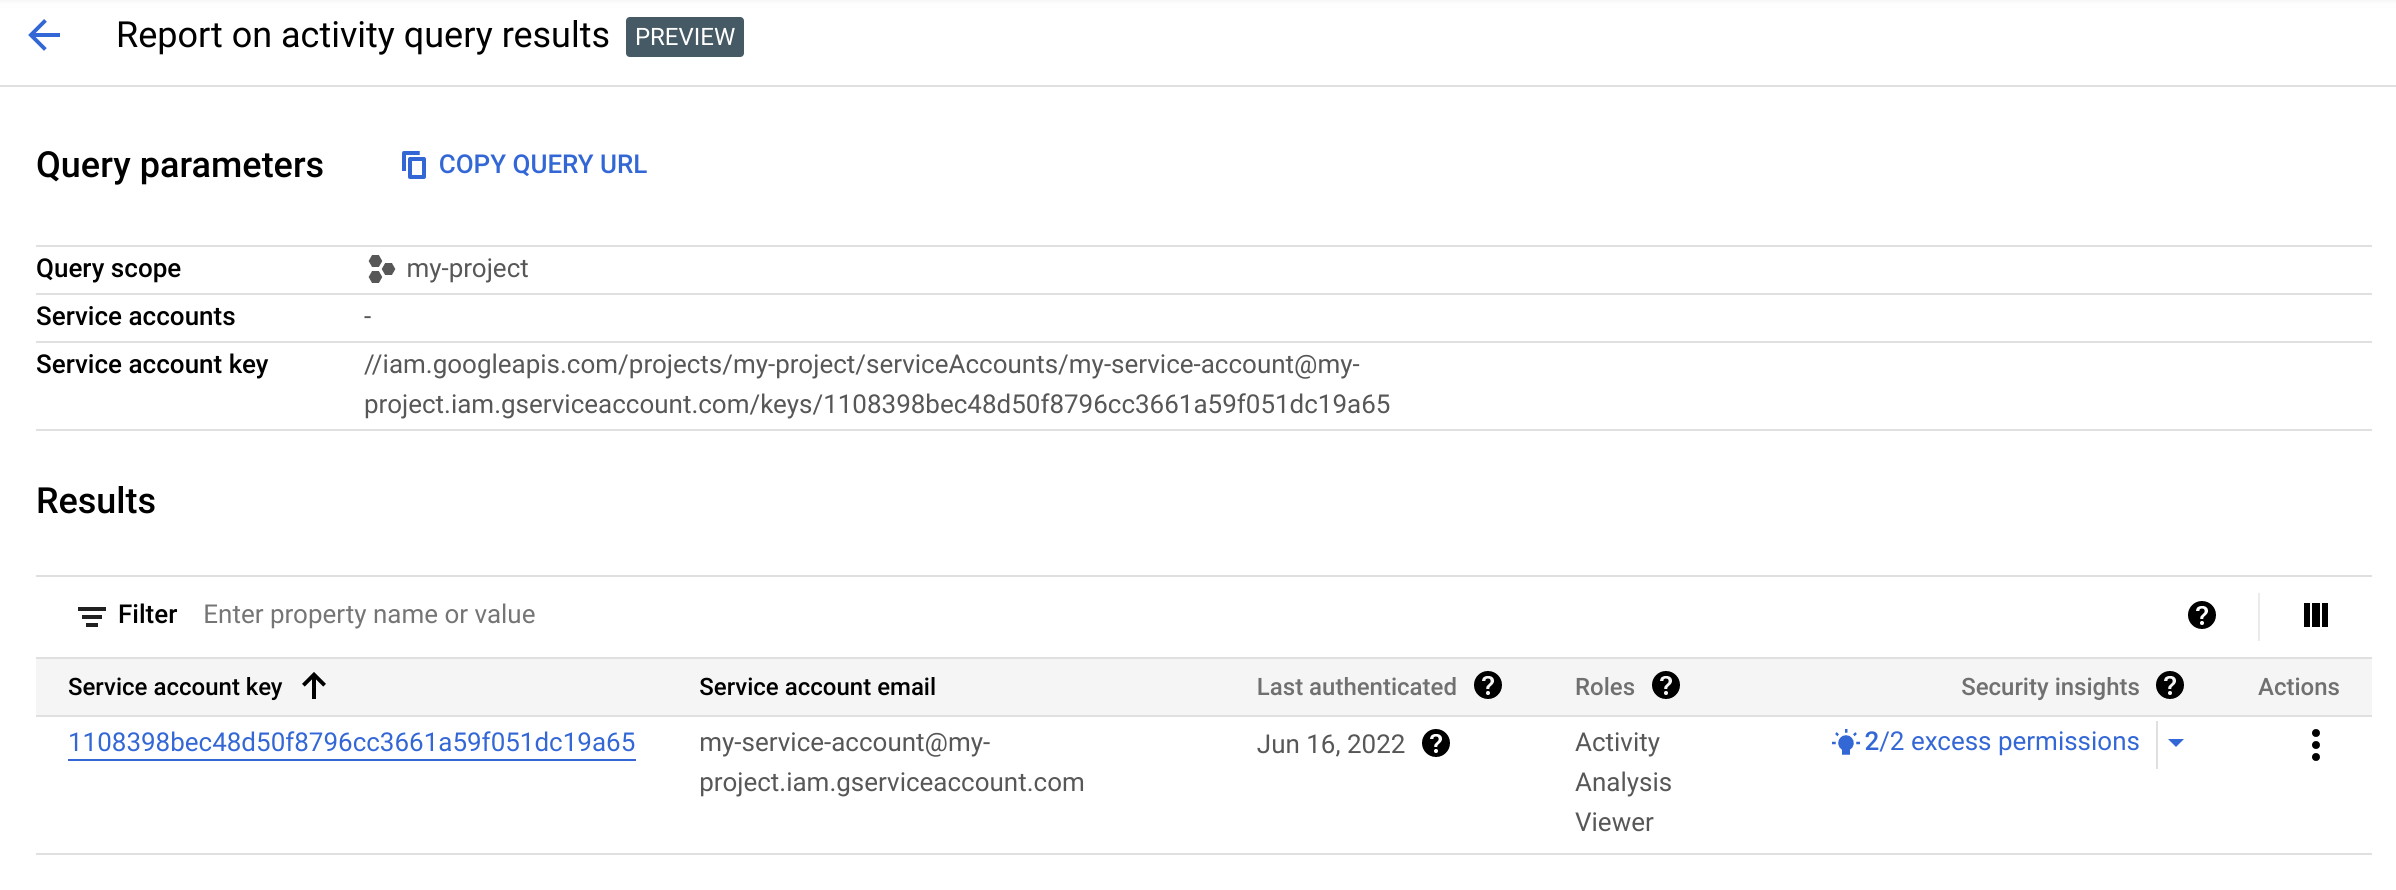 https://cloud.google.com/static/policy-intelligence/img/activity-analyzer-service-account-key-2x.png